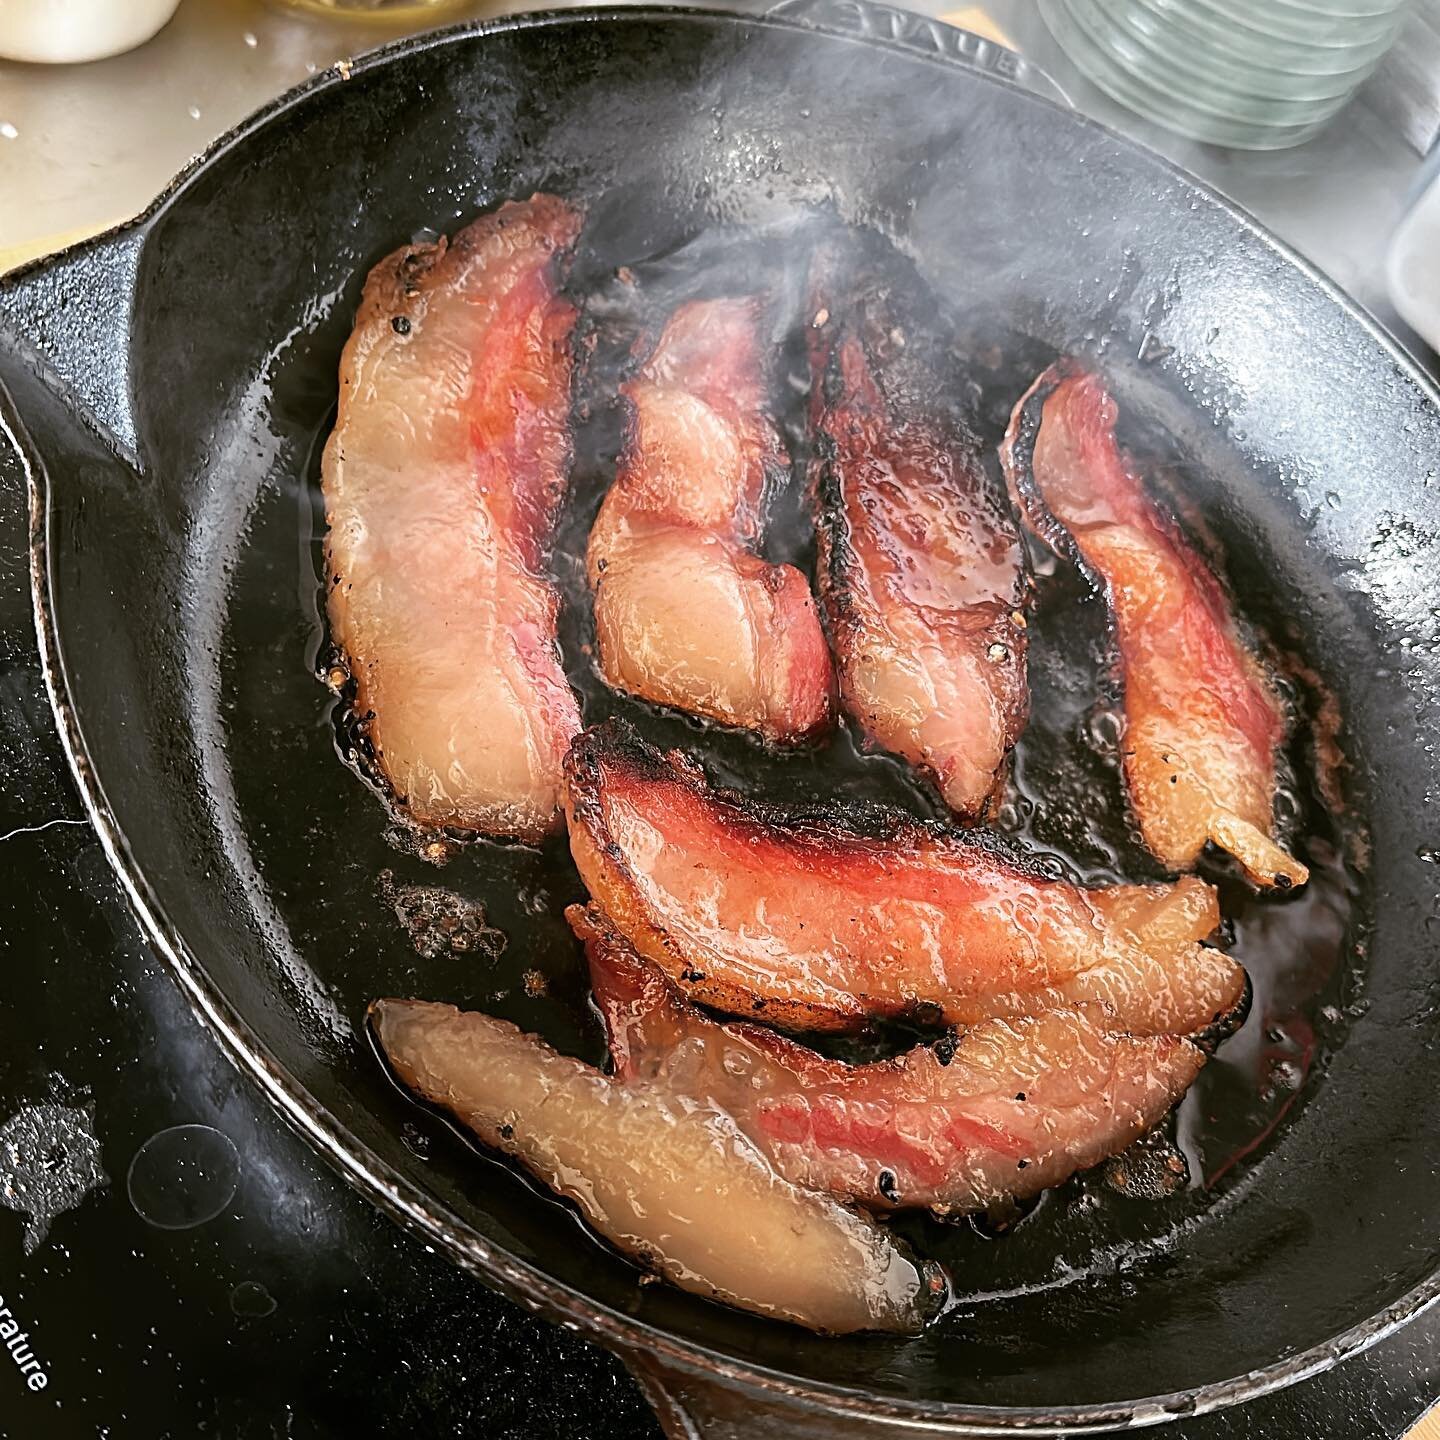 So far so good! Lots of bacon grease for cooking. Yesss! #baconbaconbacon #homecured